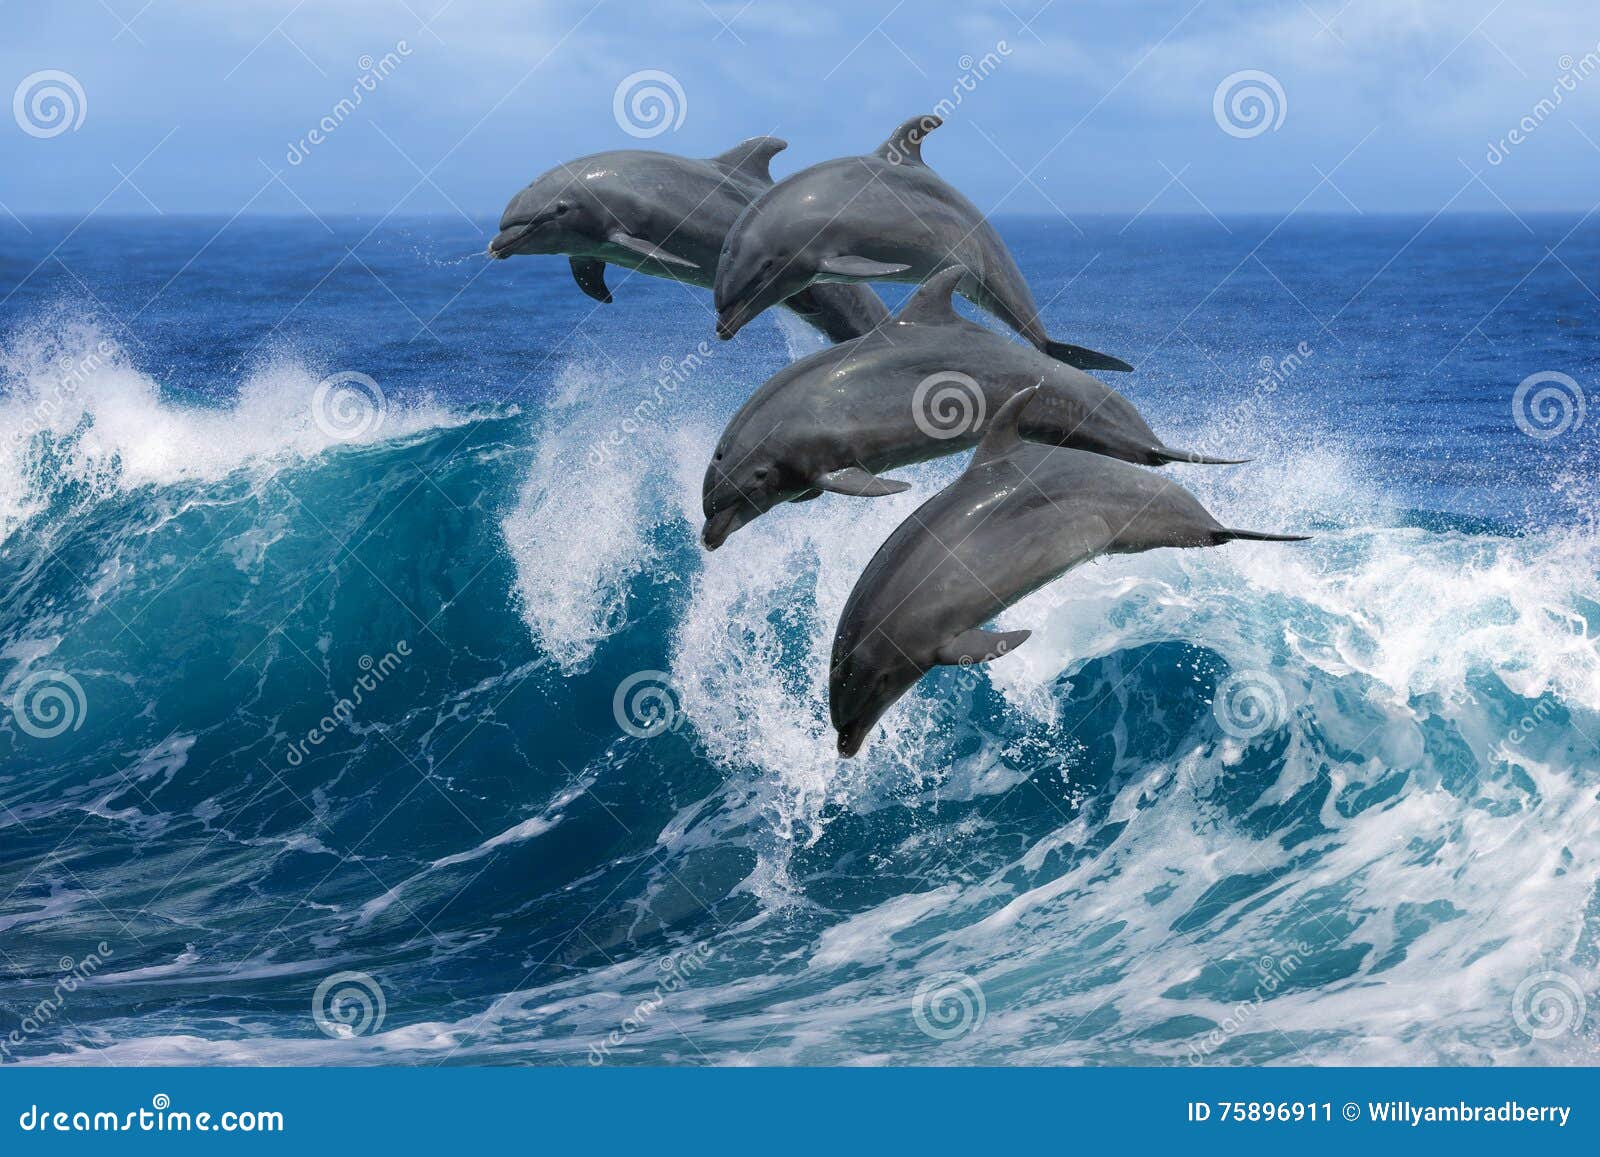 Dolphins Jumping Over Waves Stock Image - Image of aquatic, dolphins:  75896911